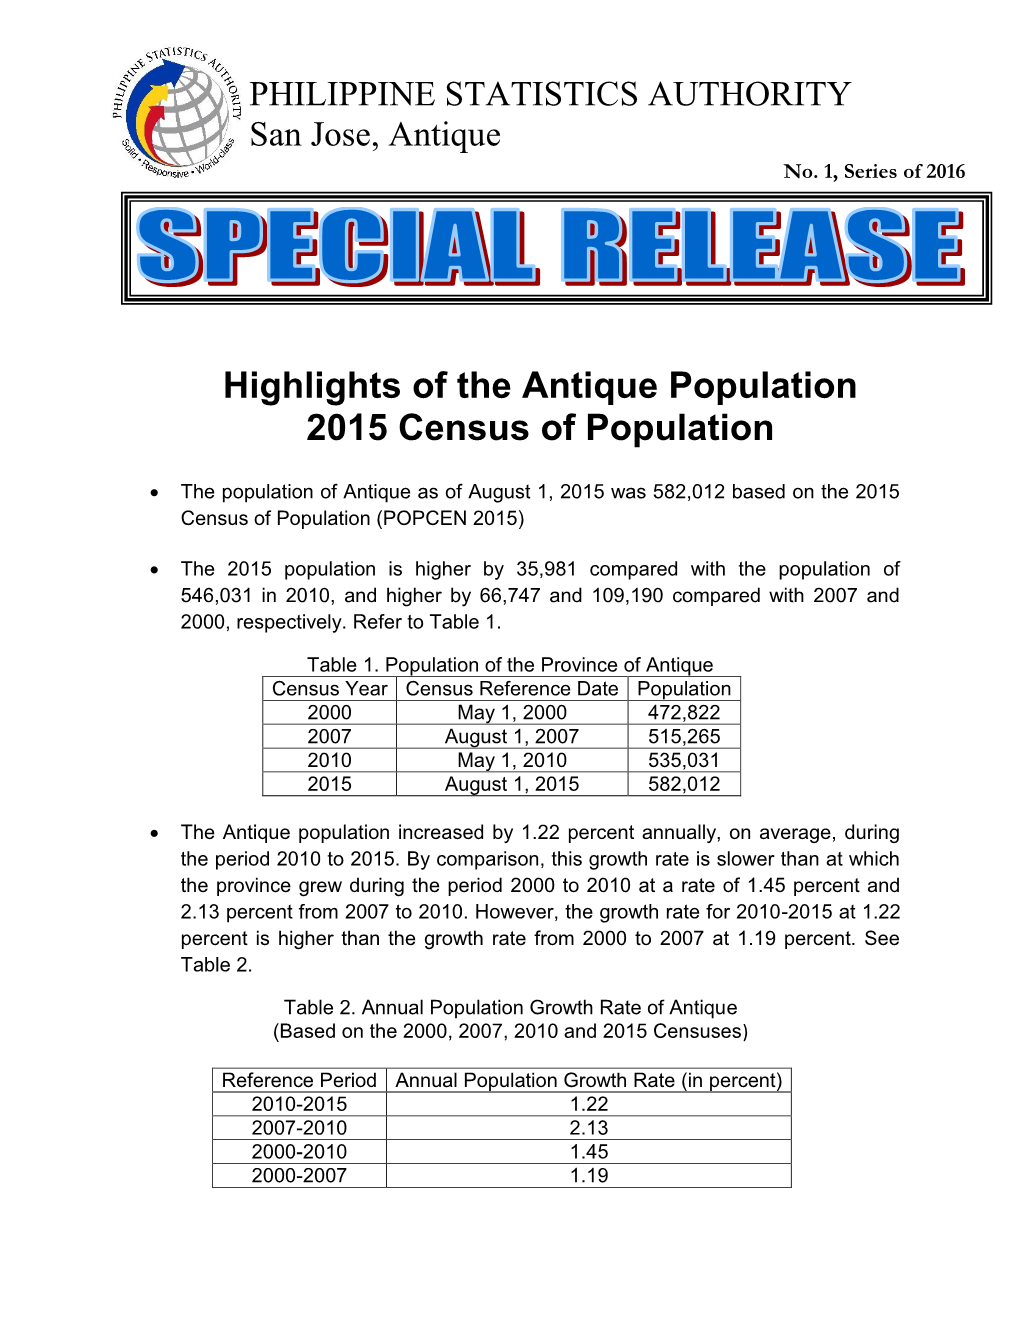 Highlights of the Antique Population 2015 Census of Population